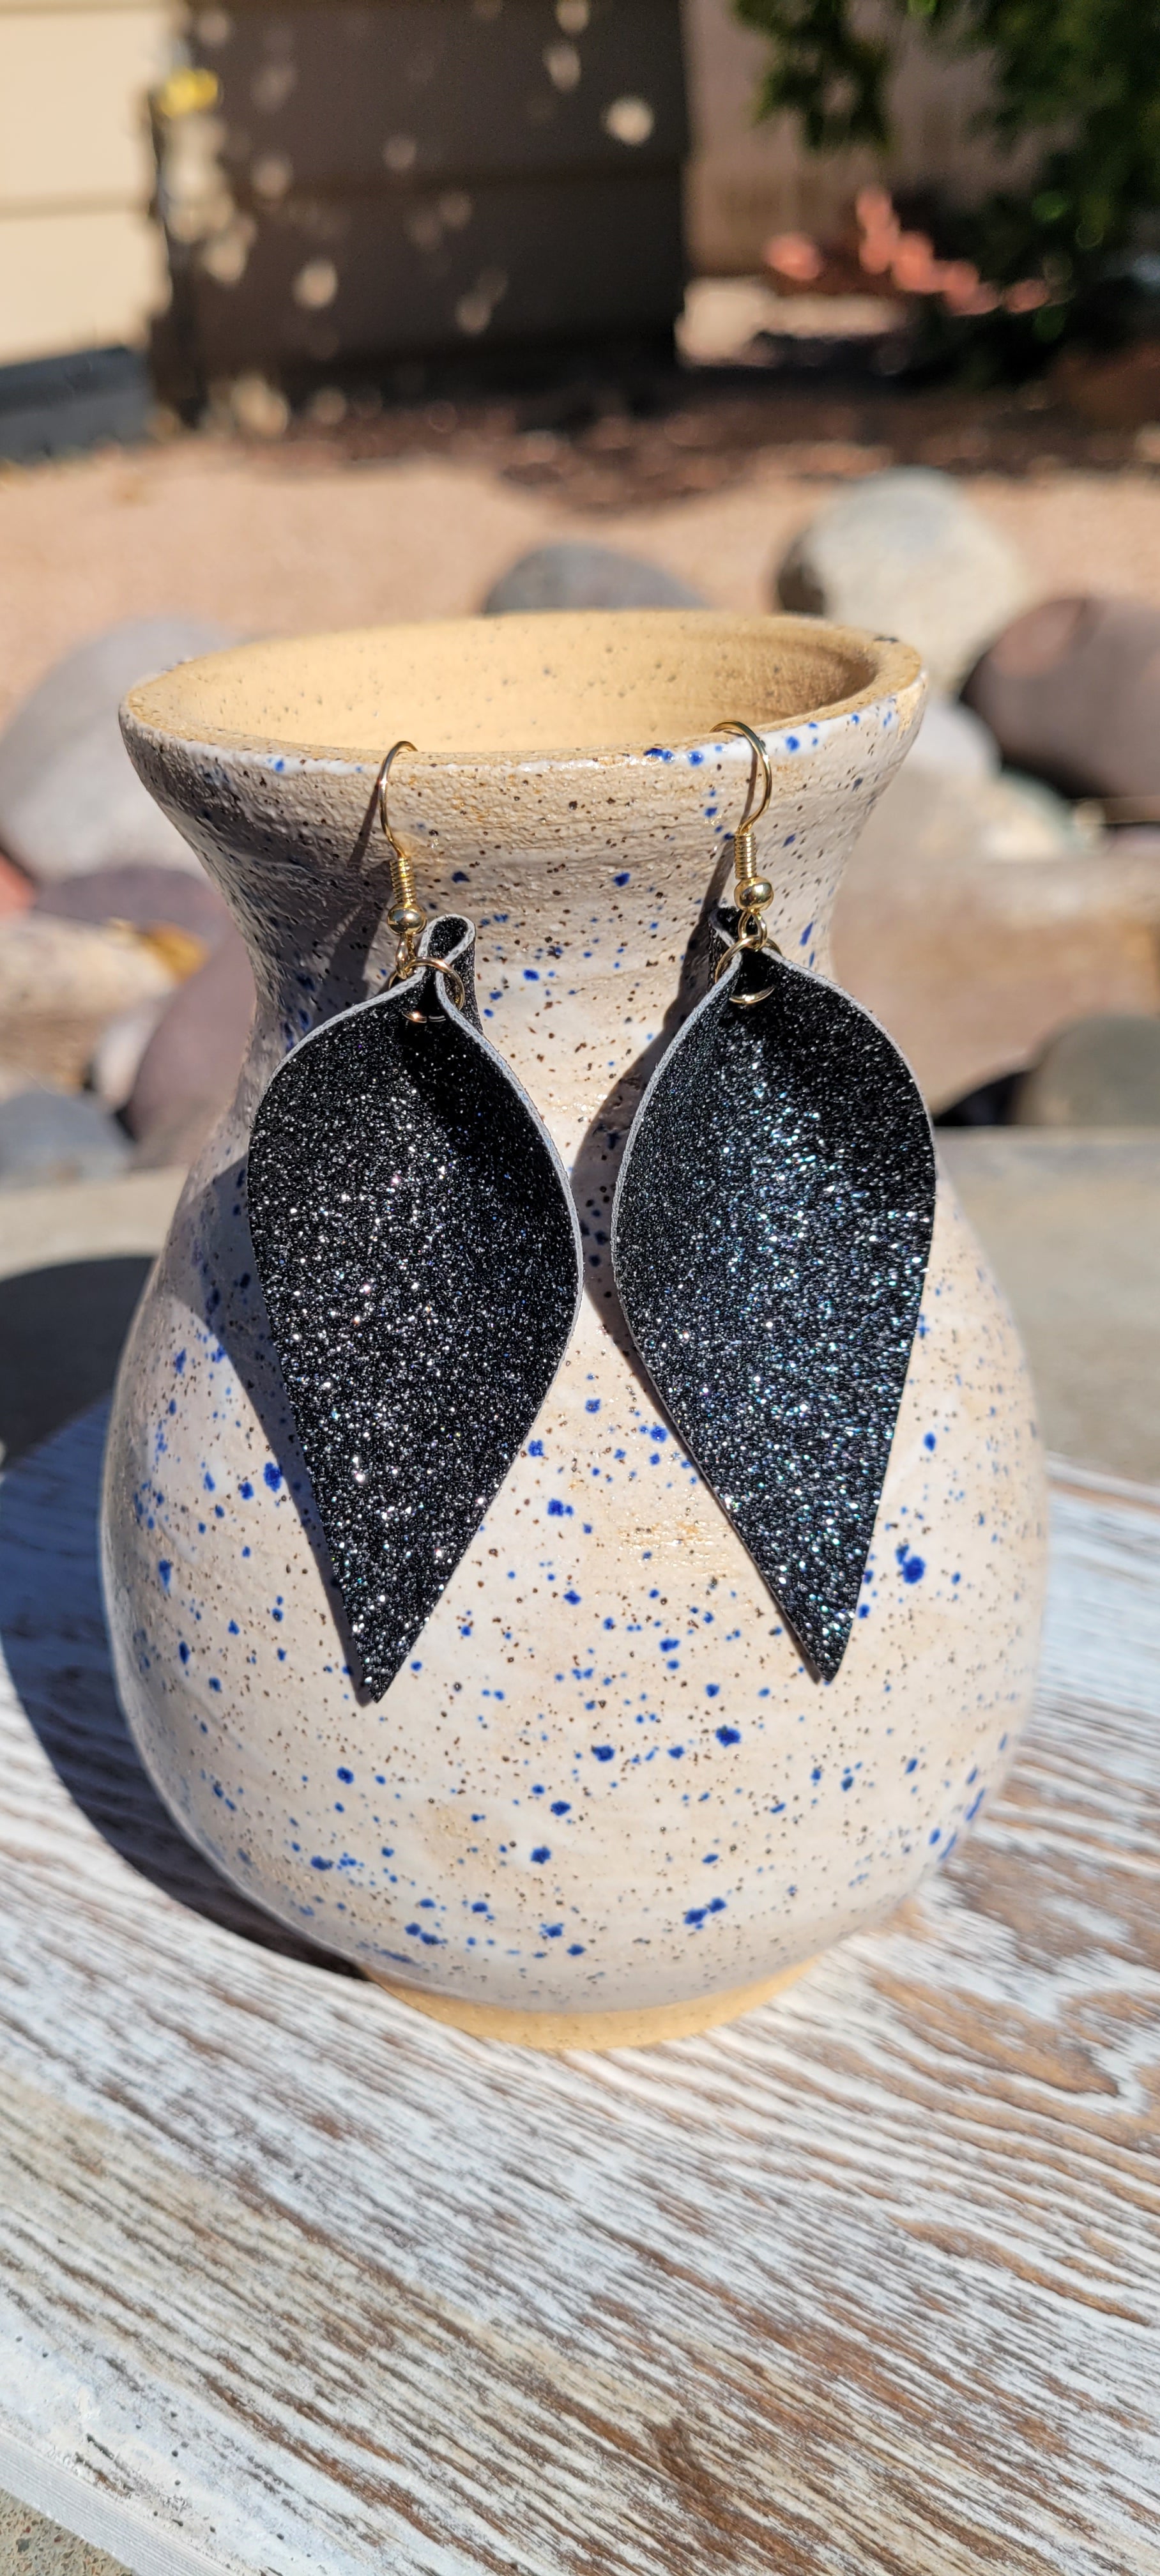 Black glitter Inverted teardrop shape Brushed gold fish hook dangle earrings Rubber earring back Whether you want to be on the wild side or classy this earring set it will add a fun touch to your outfit